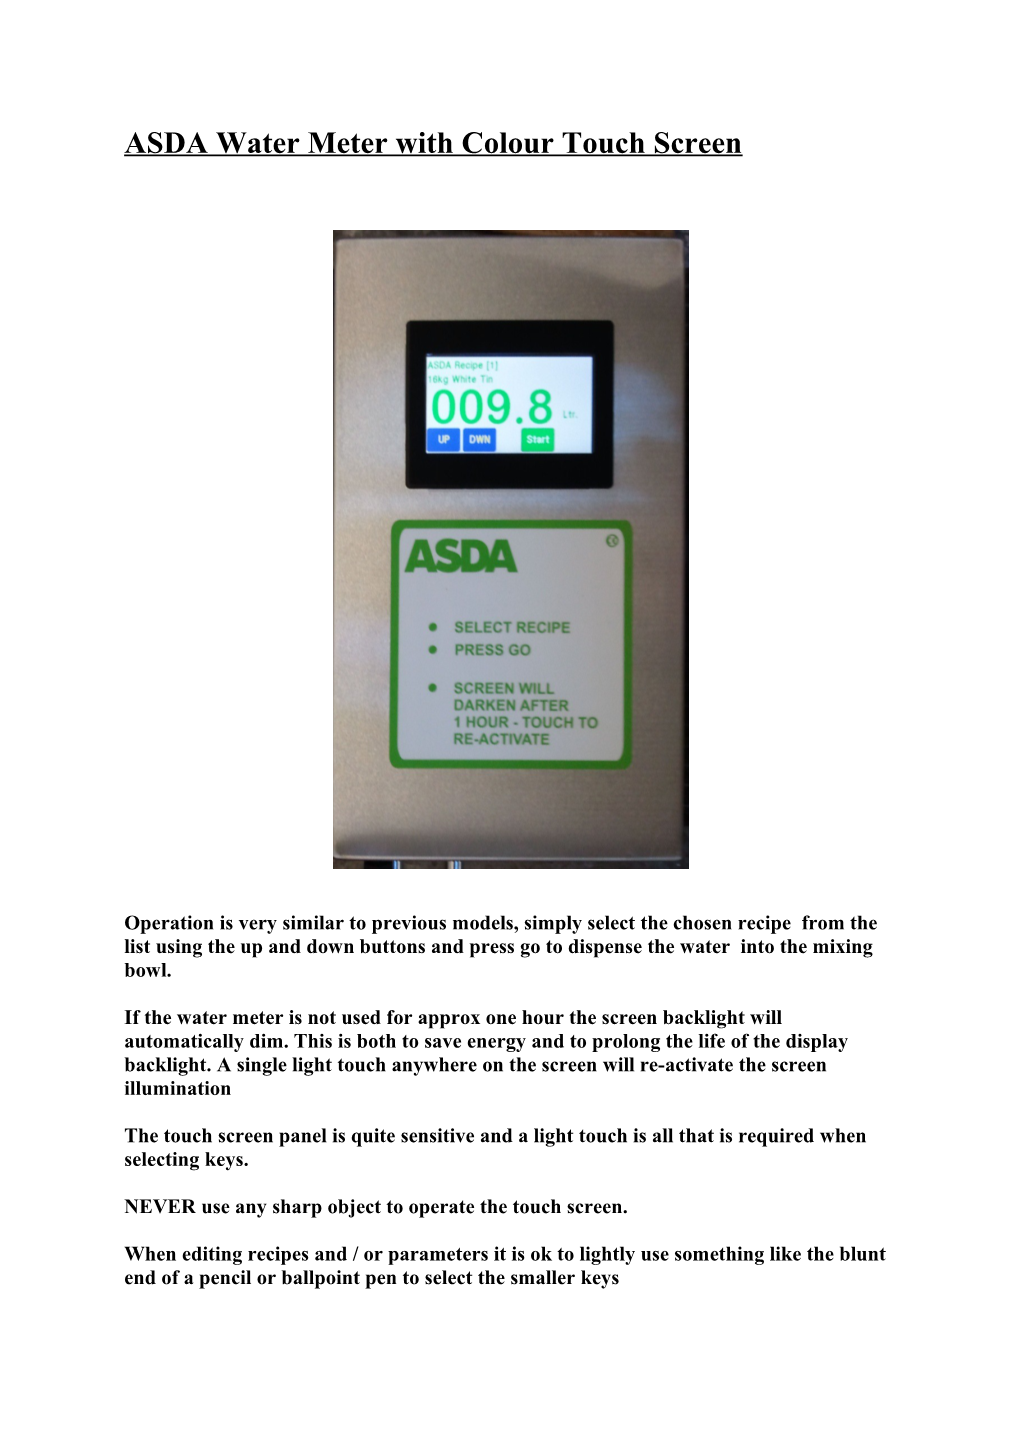 ASDA Water Meter with Colour Touch Screen